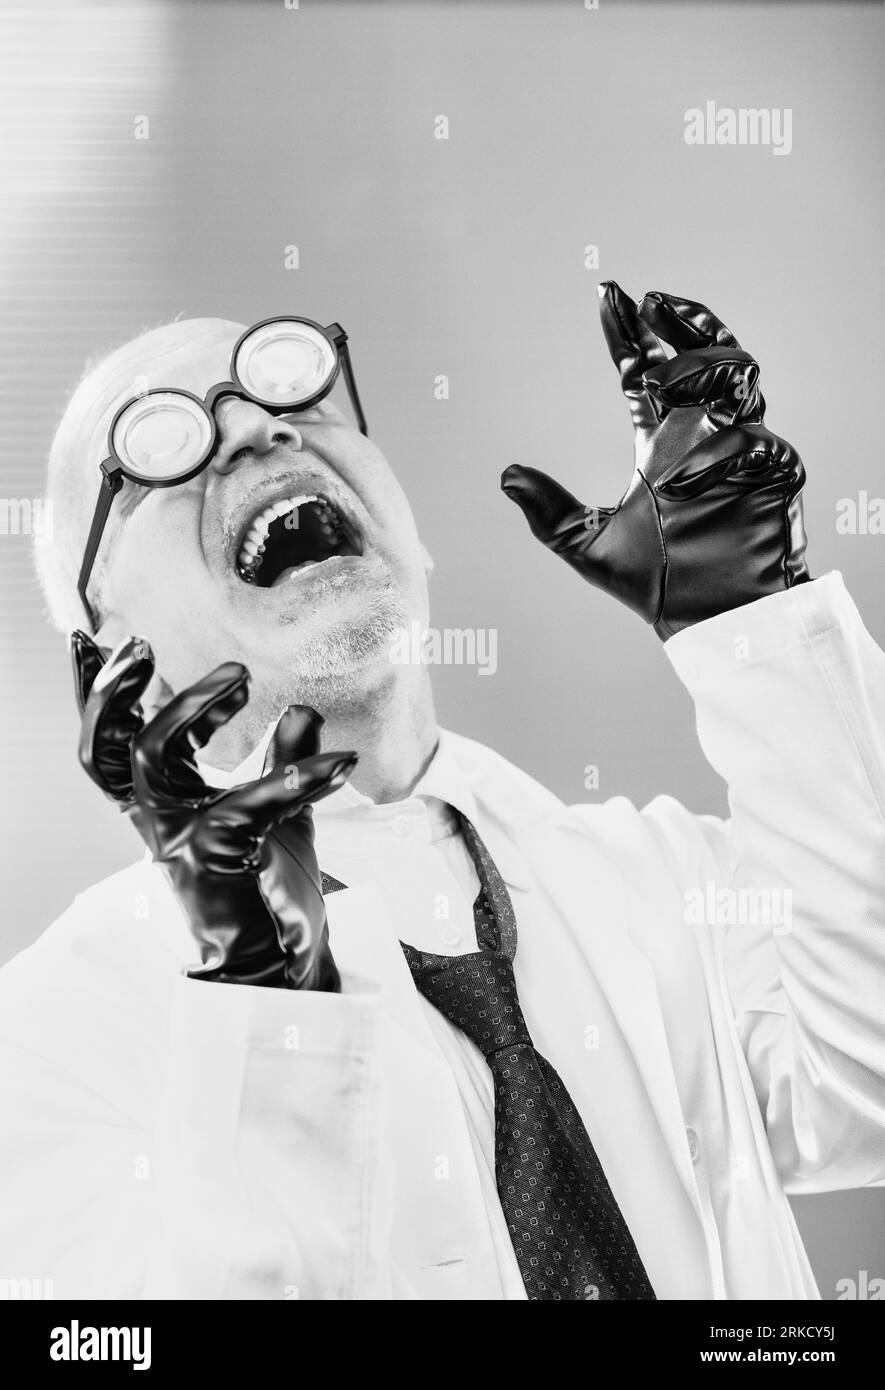 mad scientist, an iconic evil professor in outdated black and white, cackles madly at his wicked plan for world domination. Bald with thick glasses, h Stock Photo